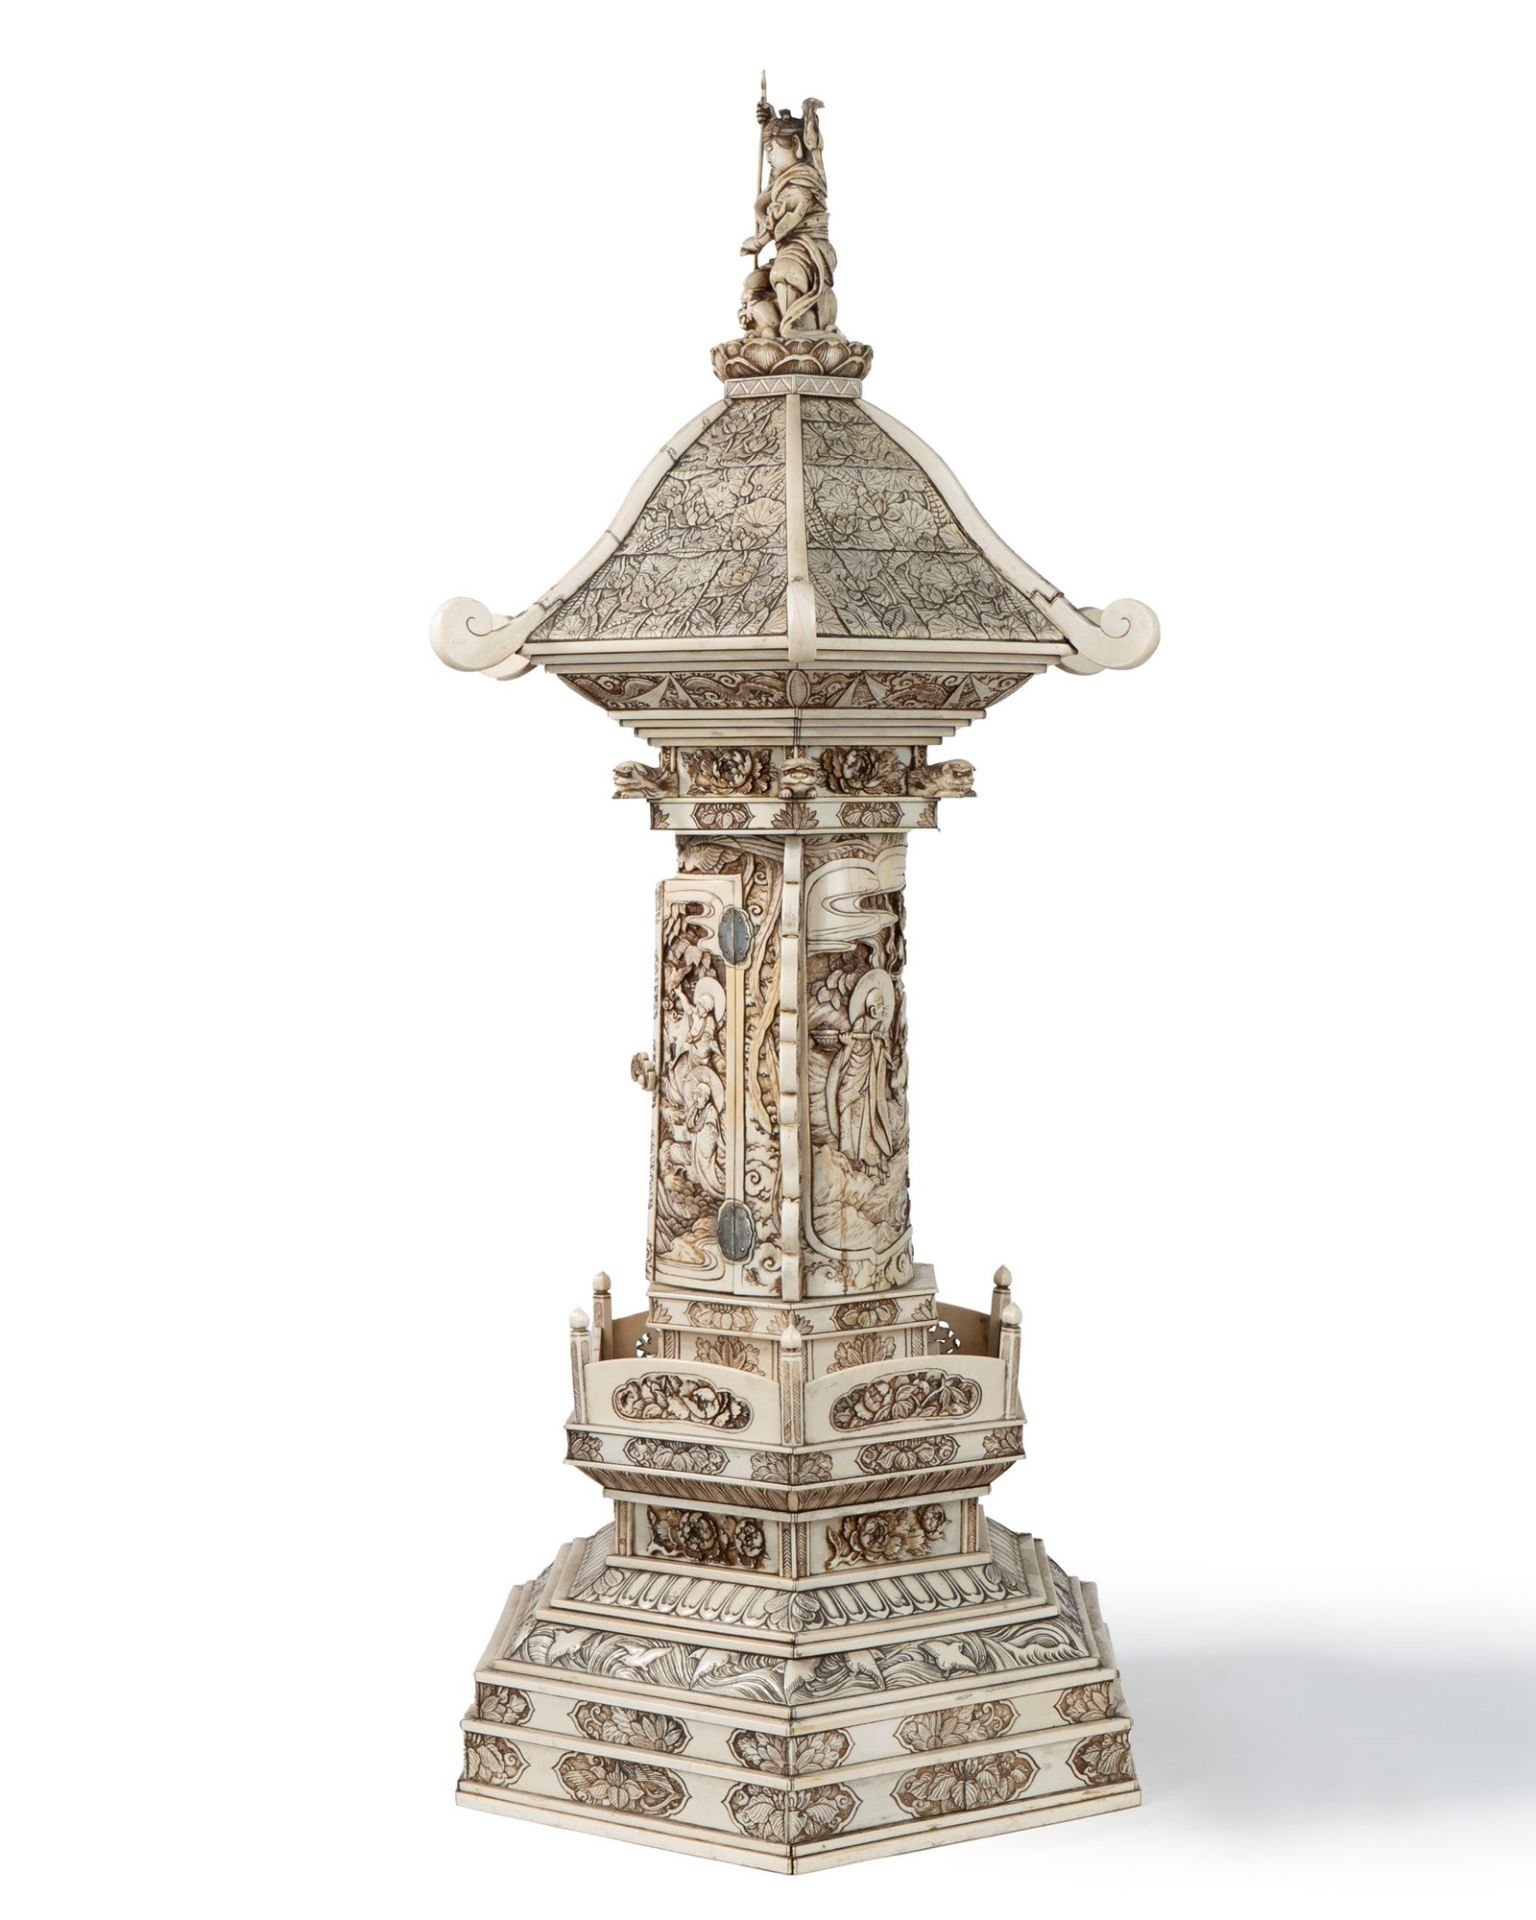 AN IMPORTANT IVORY PAGODA, Japan, Meiji period (1868-1912) - Image 4 of 9